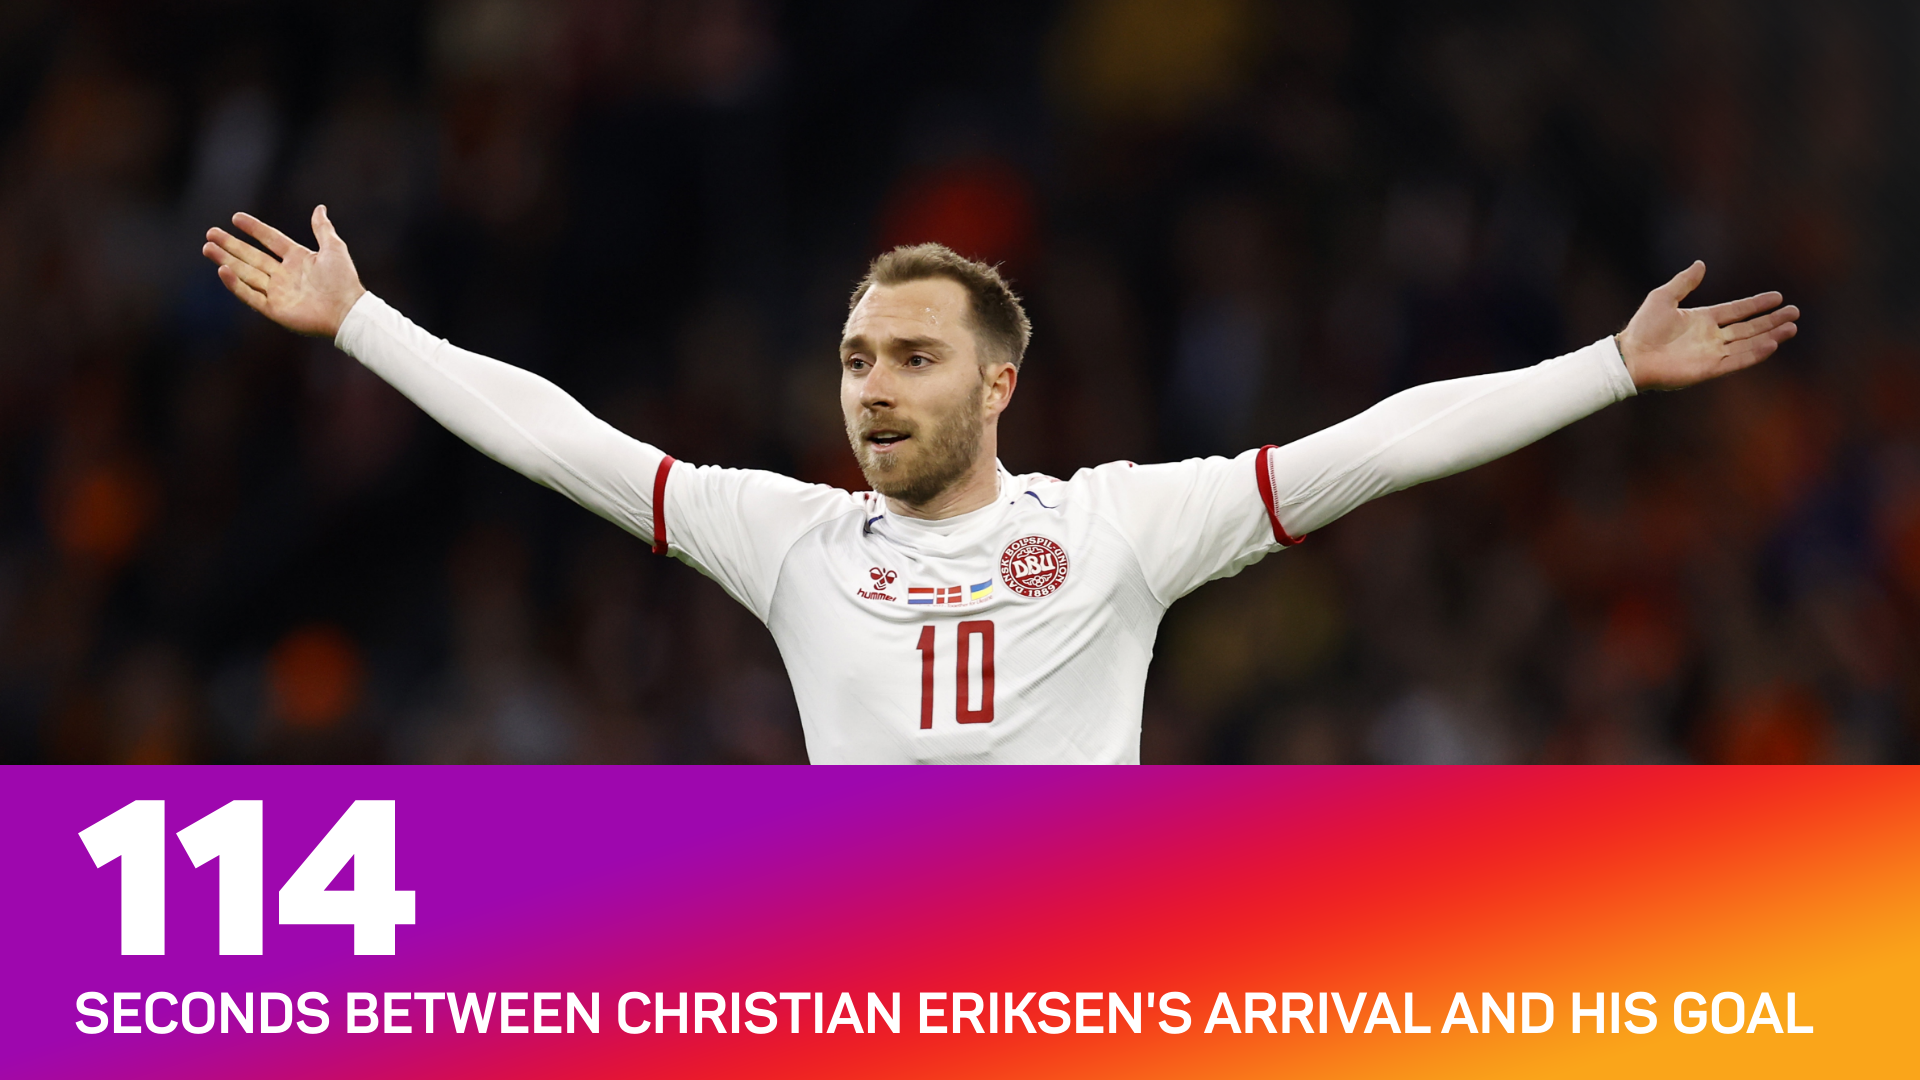 Christian Eriksen scored 114 seconds after being brought on against the Netherlands